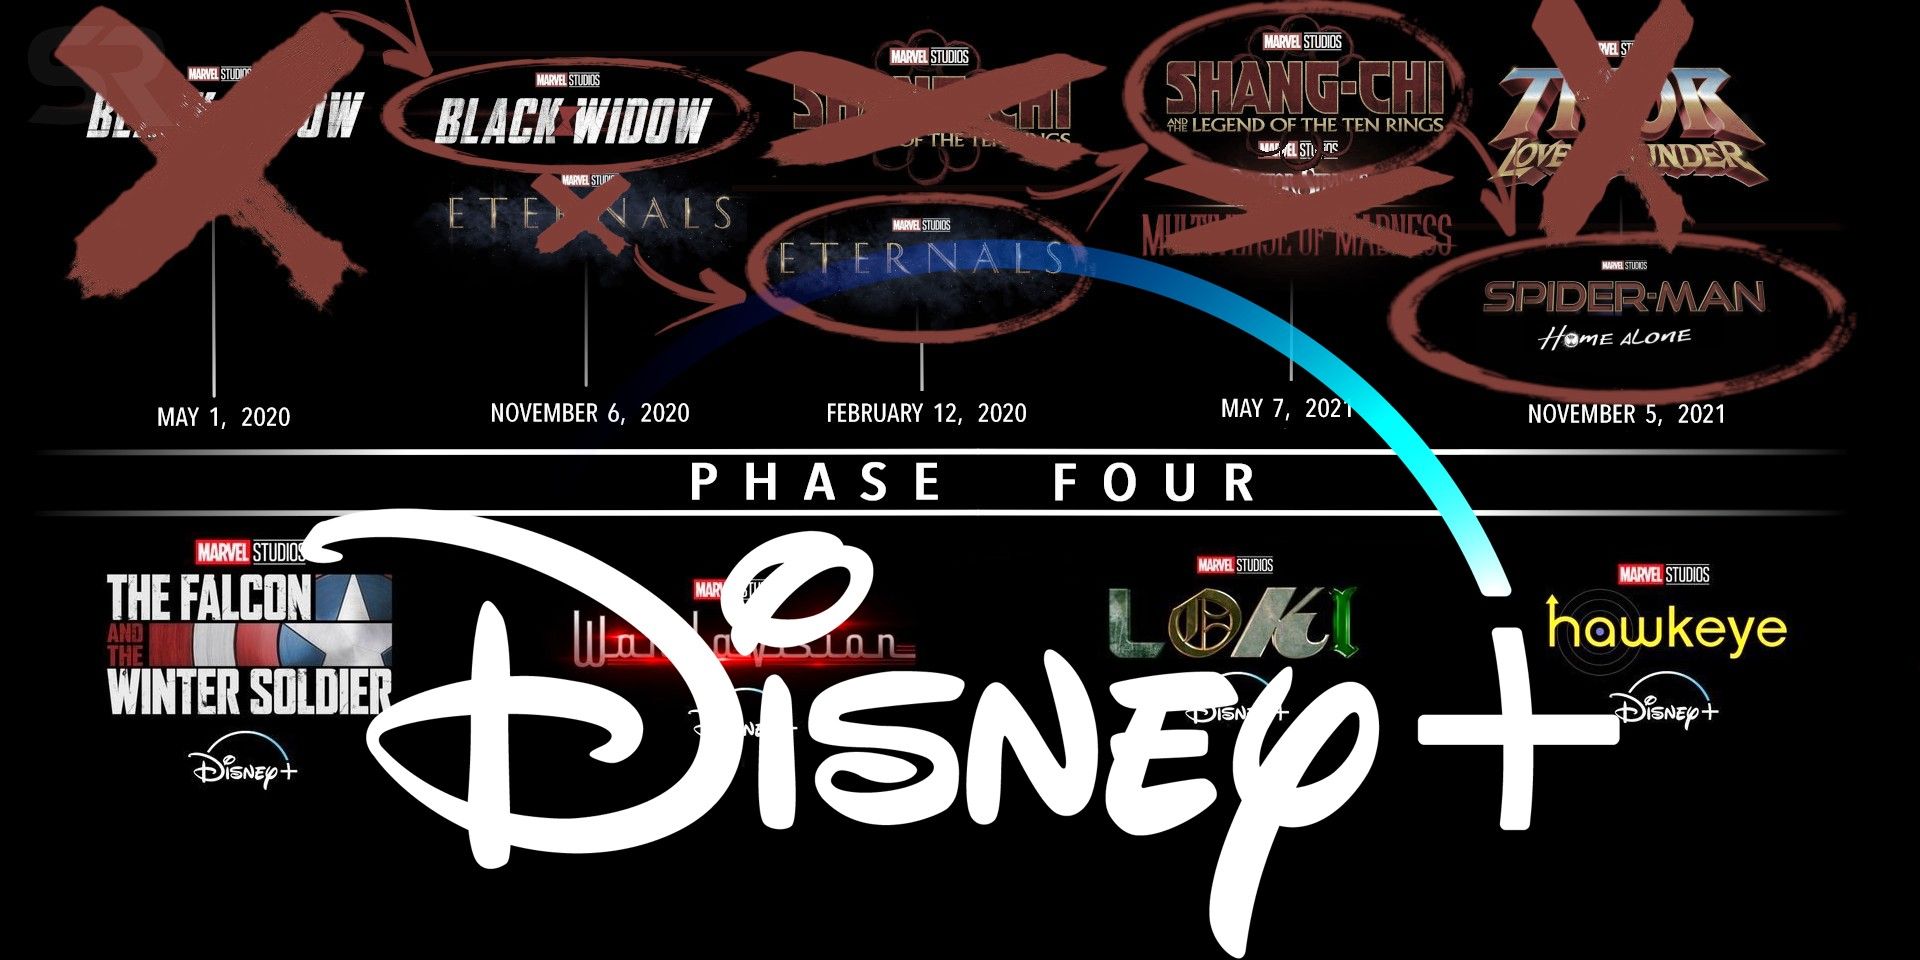 Marvel S New Phase 4 Slate Is Good For Mcu S First Disney Shows